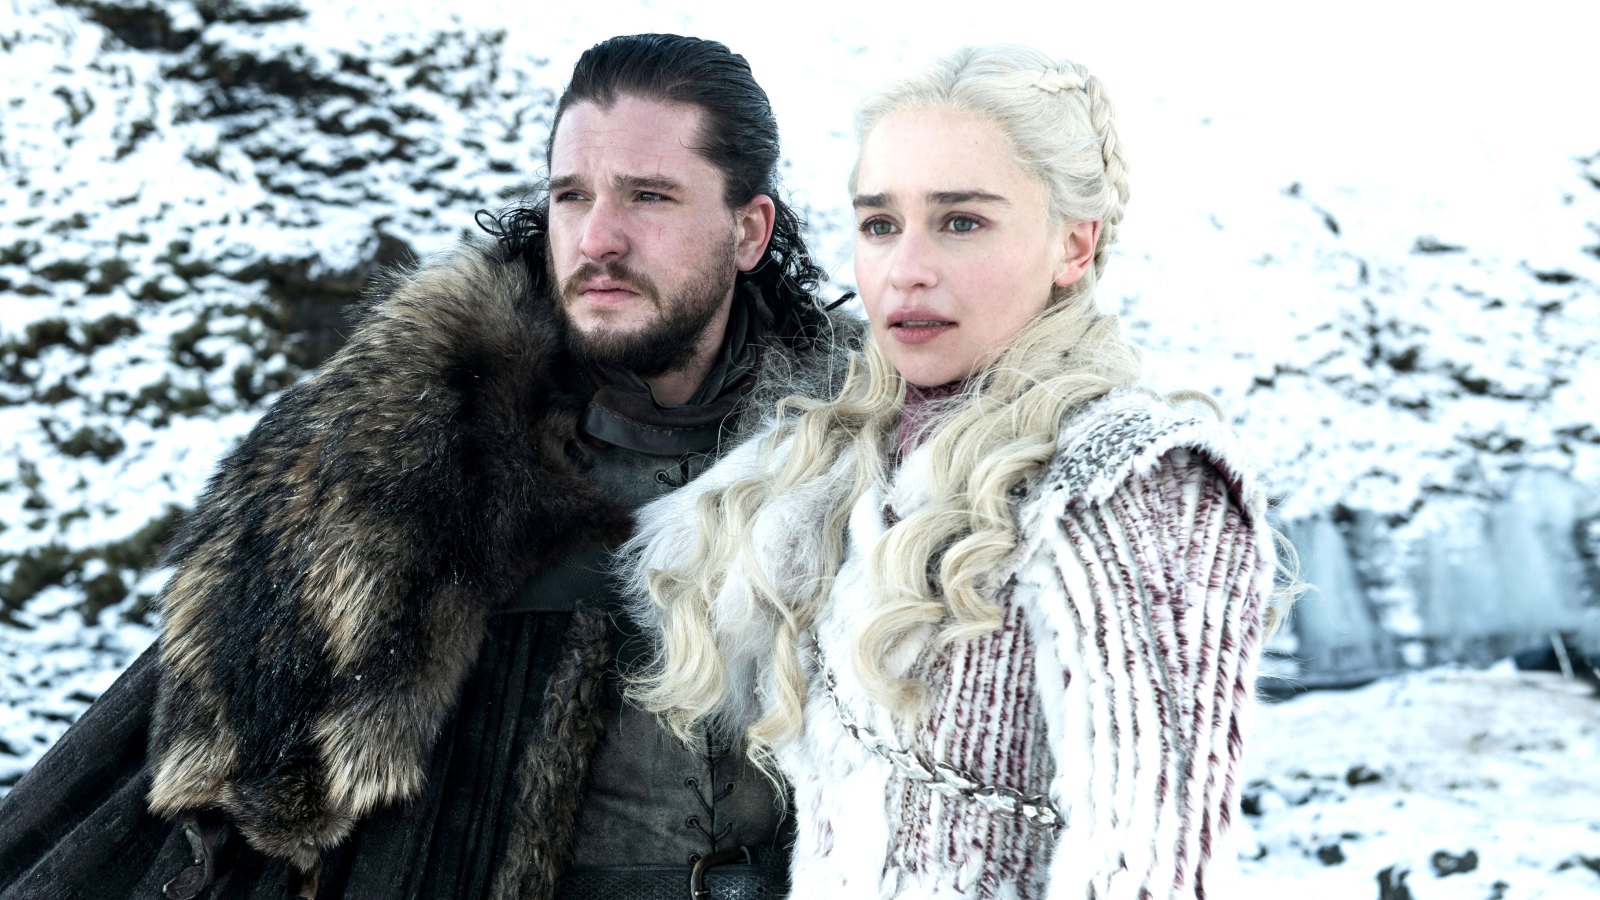 Kit Harington, Emilia Clarke Urban Decay Launched a Game of Thrones Collection and It's Epic